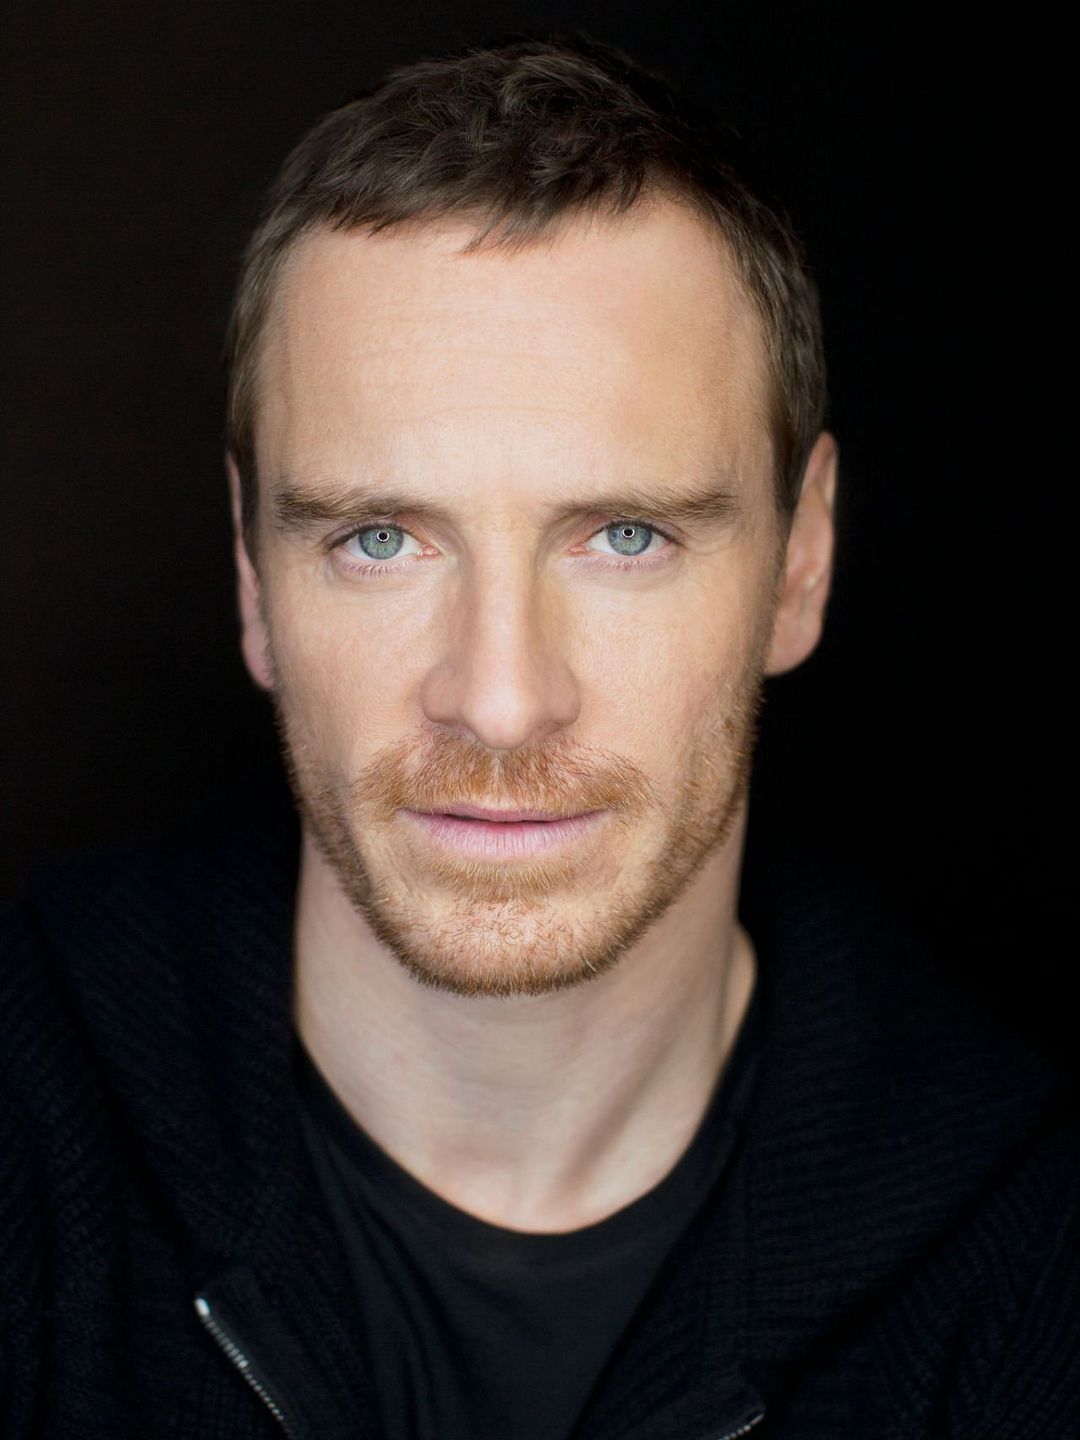 Michael Fassbender in his youth